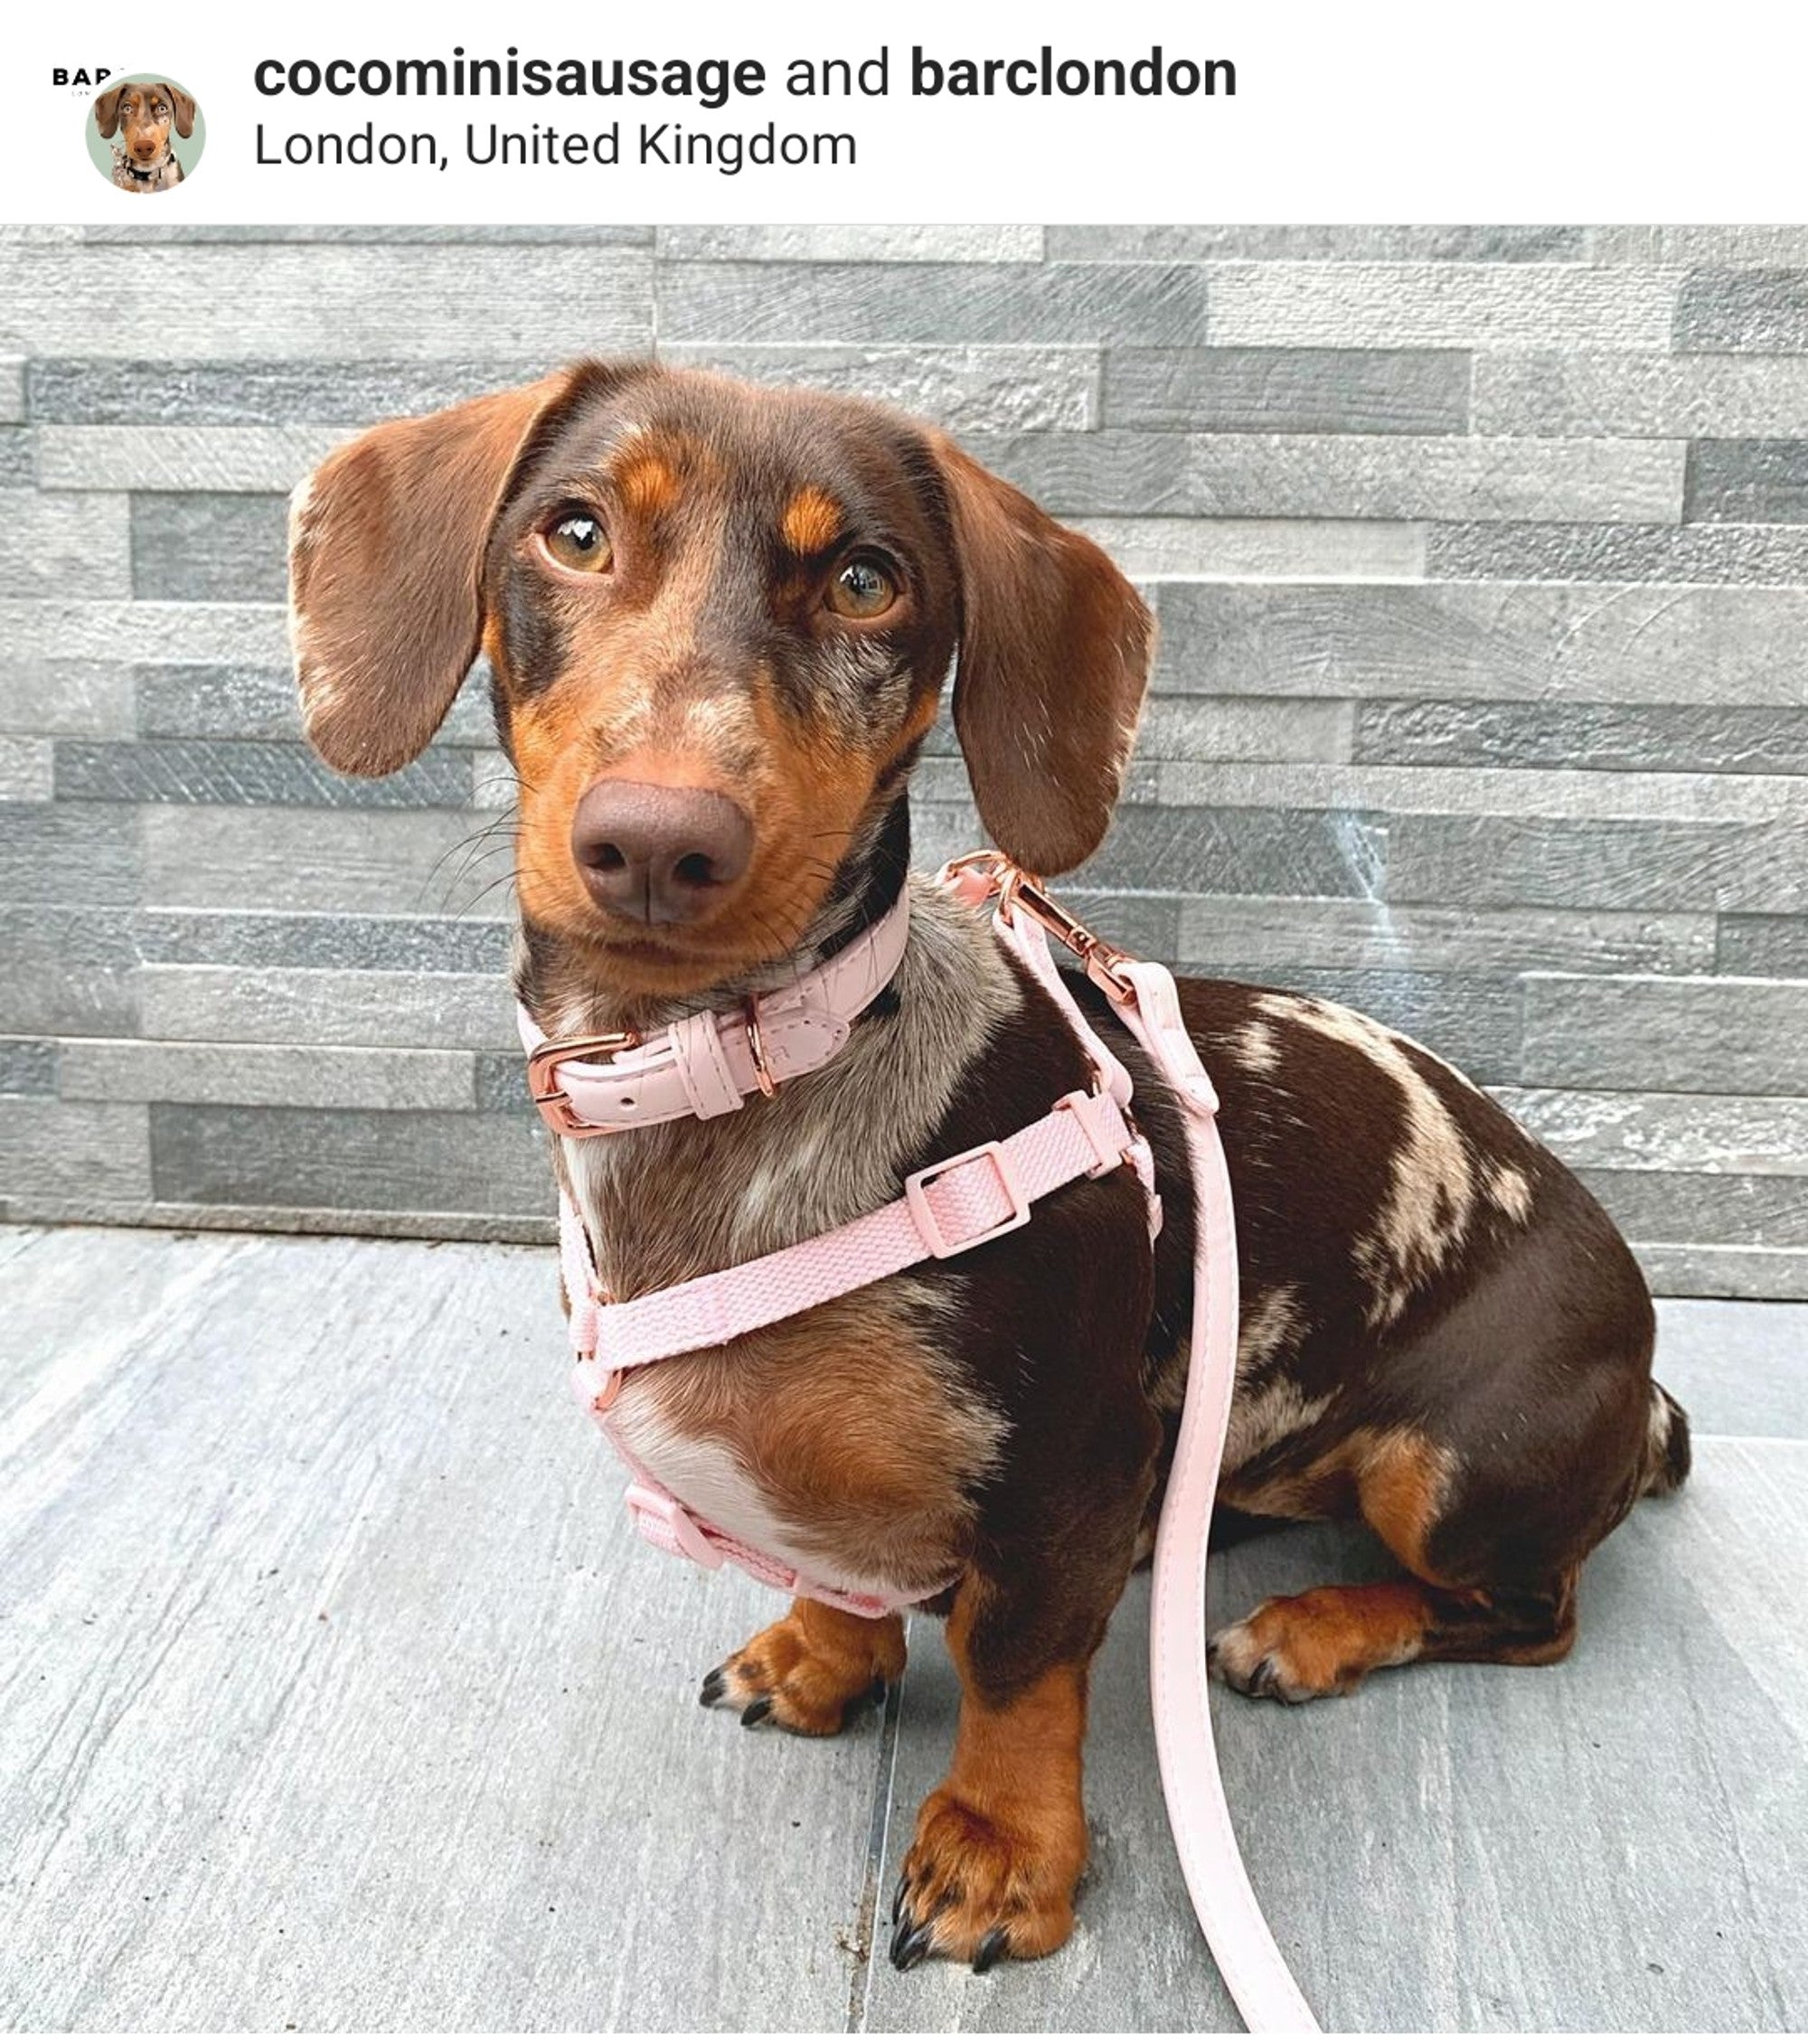 The 8 Best Dachshund Harnesses